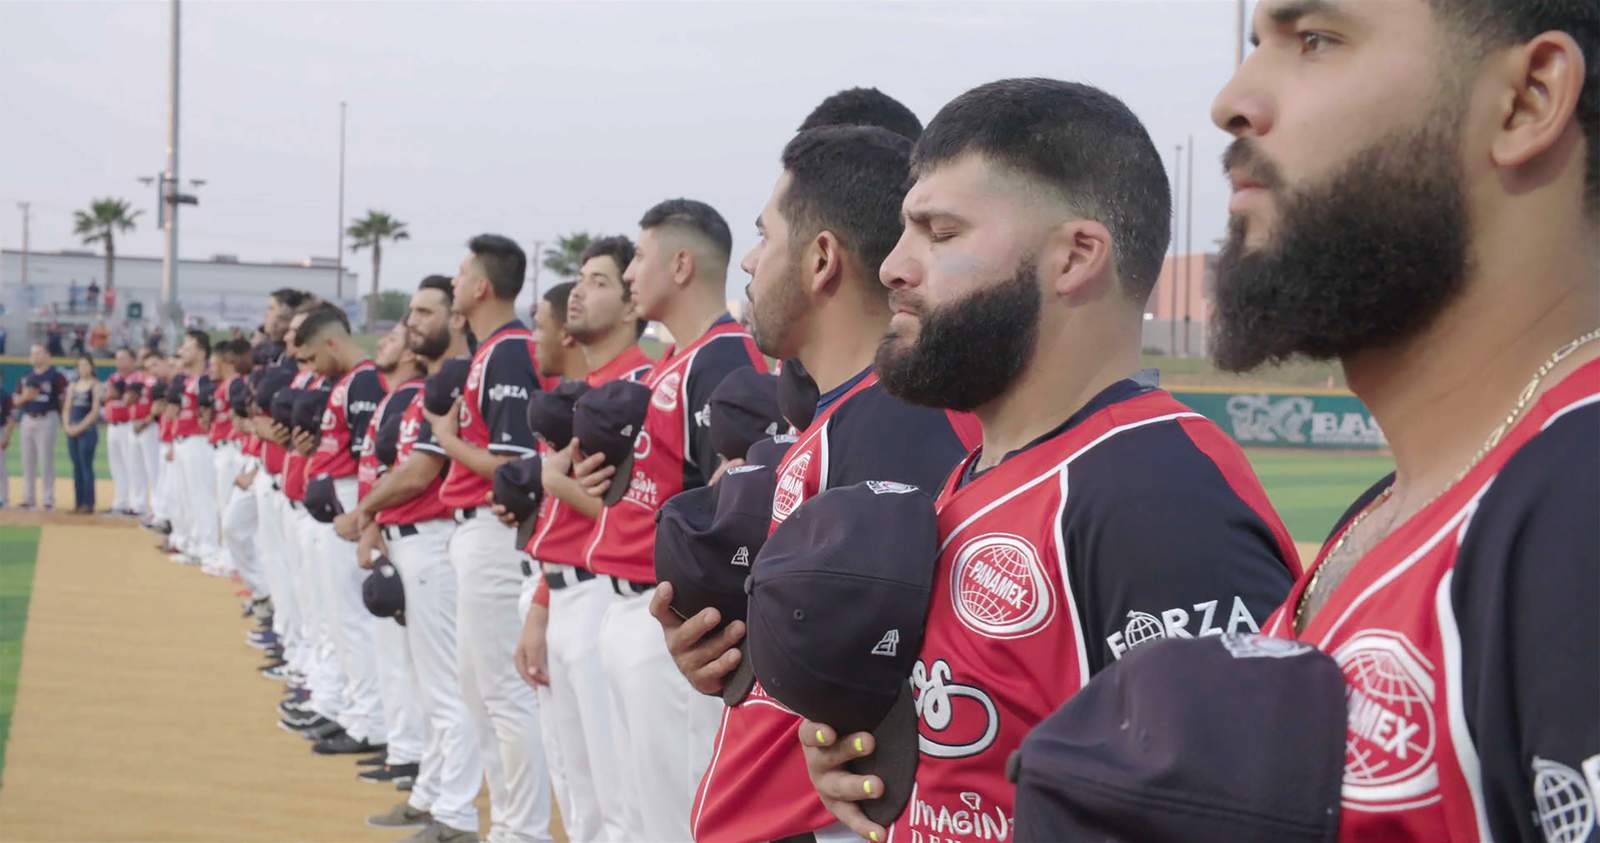 ‘Bad Hombres’ film uses baseball to show the game of borders